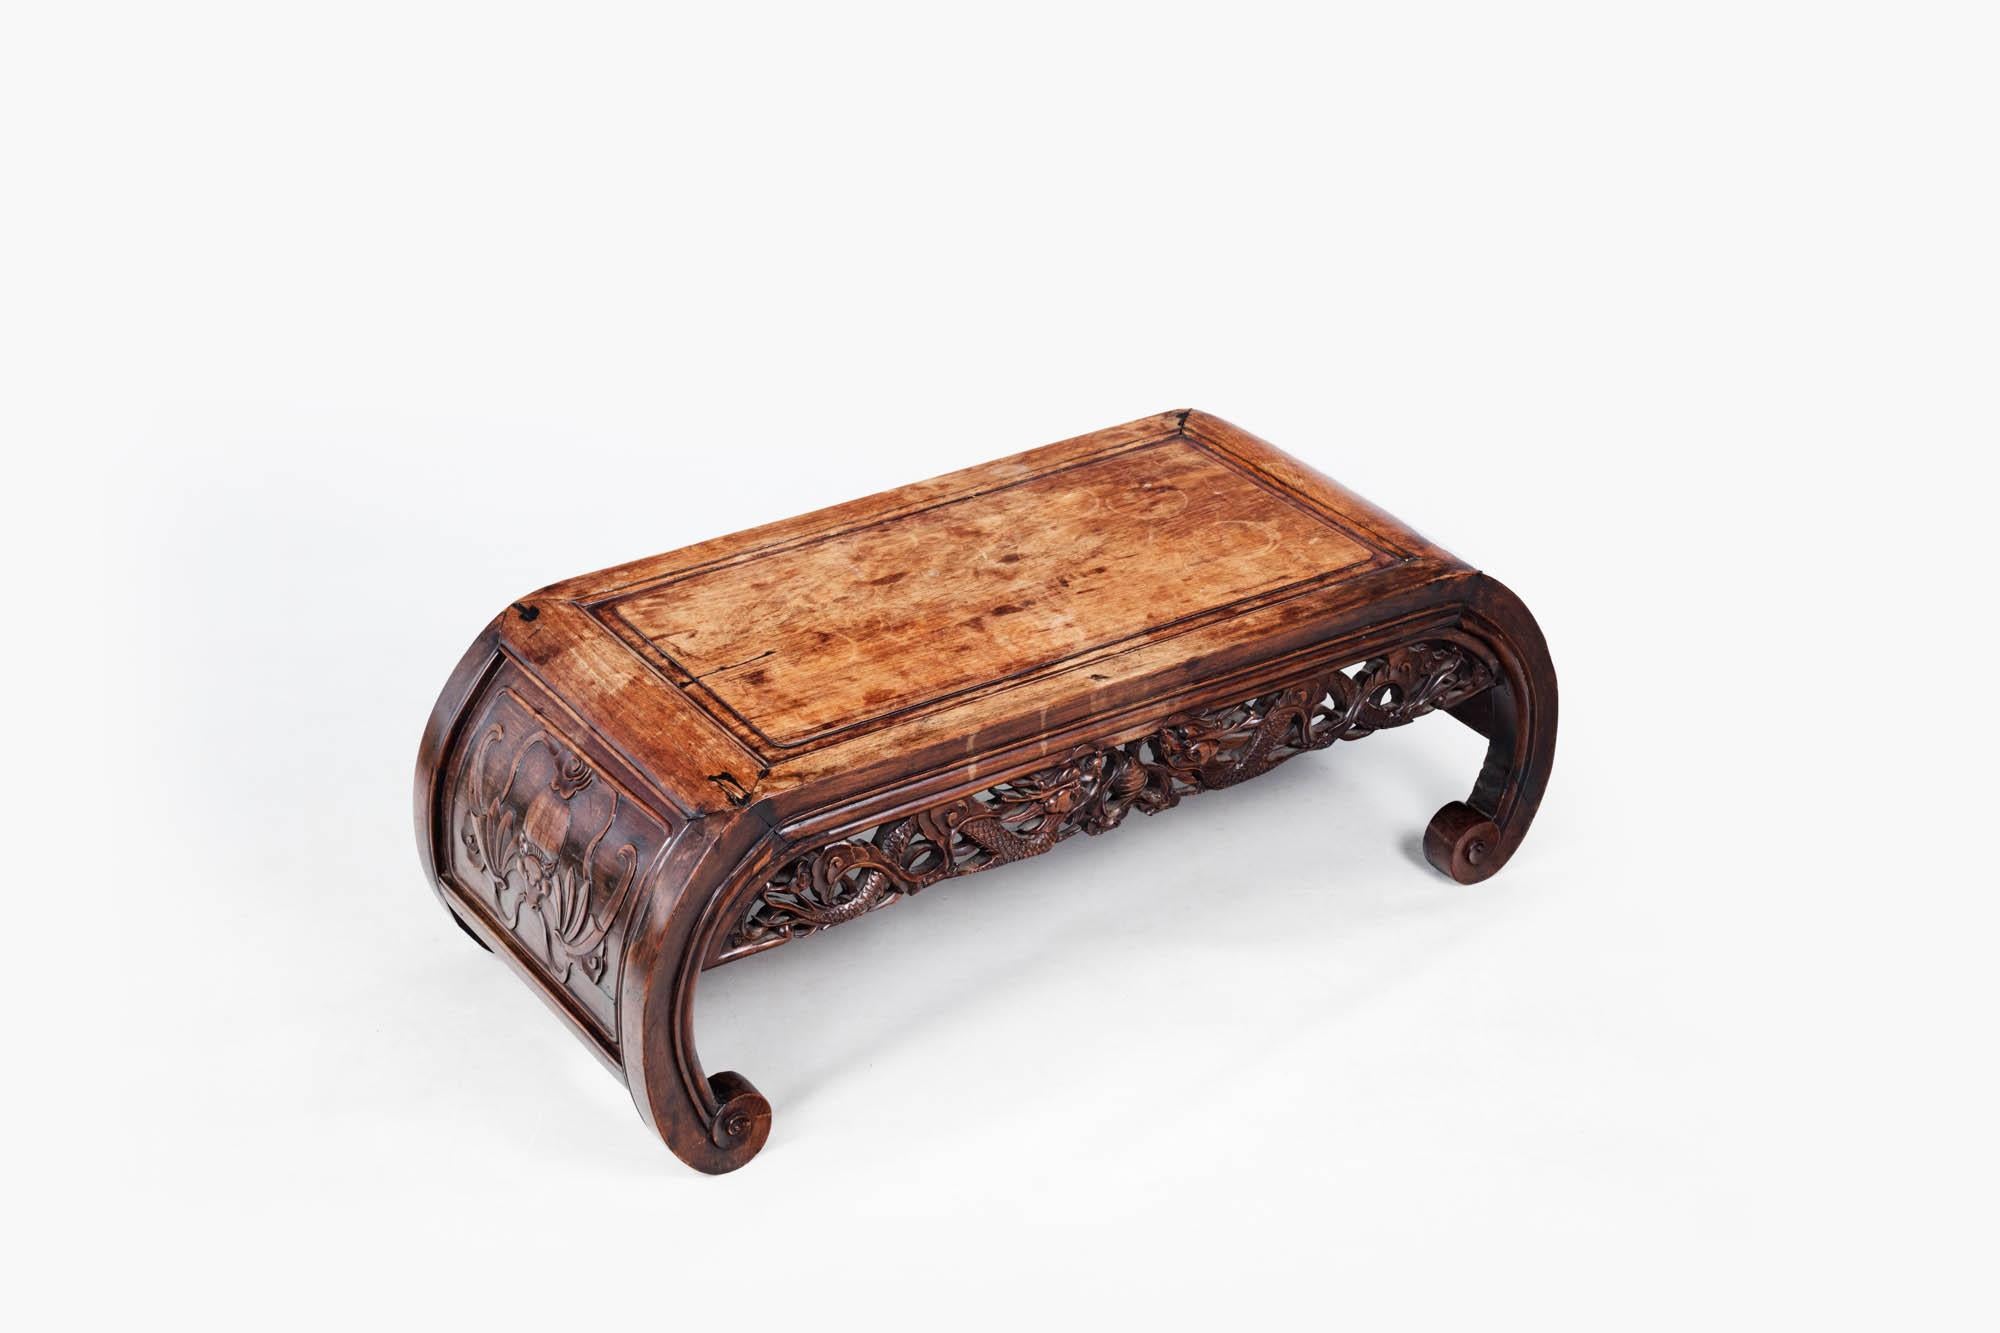 Hand-Carved Early 19th Century Qing Dynasty Period Chinese Hardwood Low Kang Table For Sale